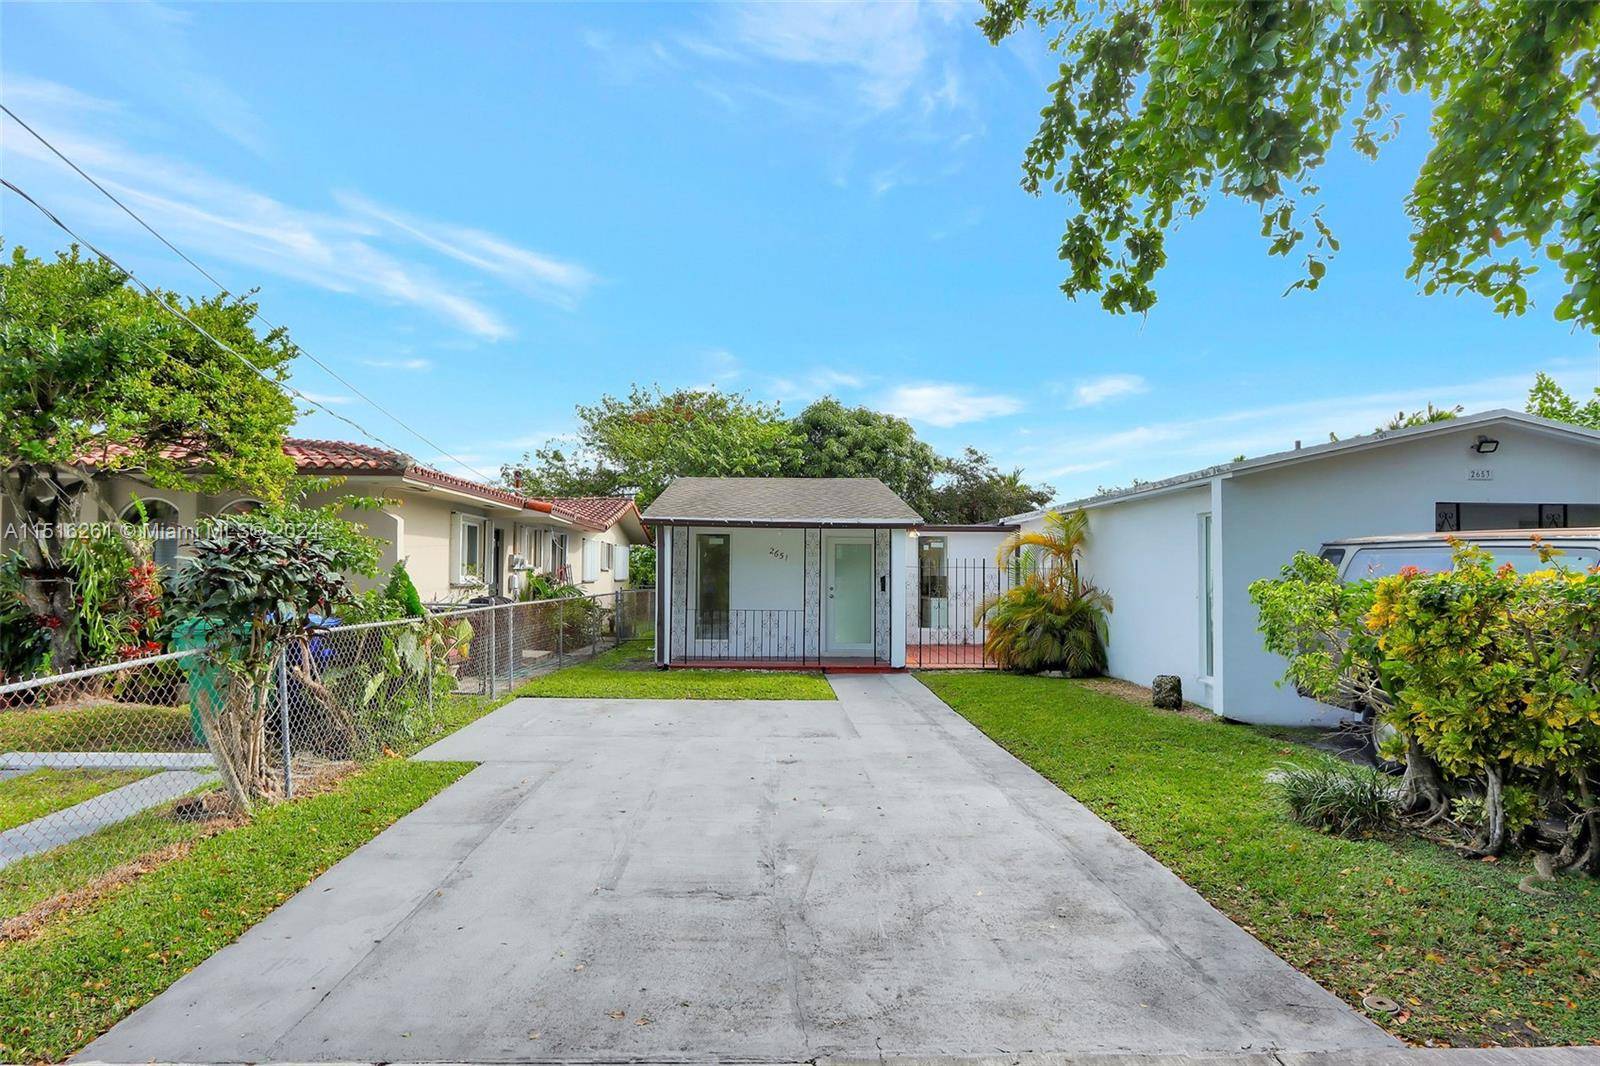 Beautiful and newly remodeled 3 bedroom 2 bathroom minutes from downtown coral gables, Douglas park, Mater Grove Academy and US1.